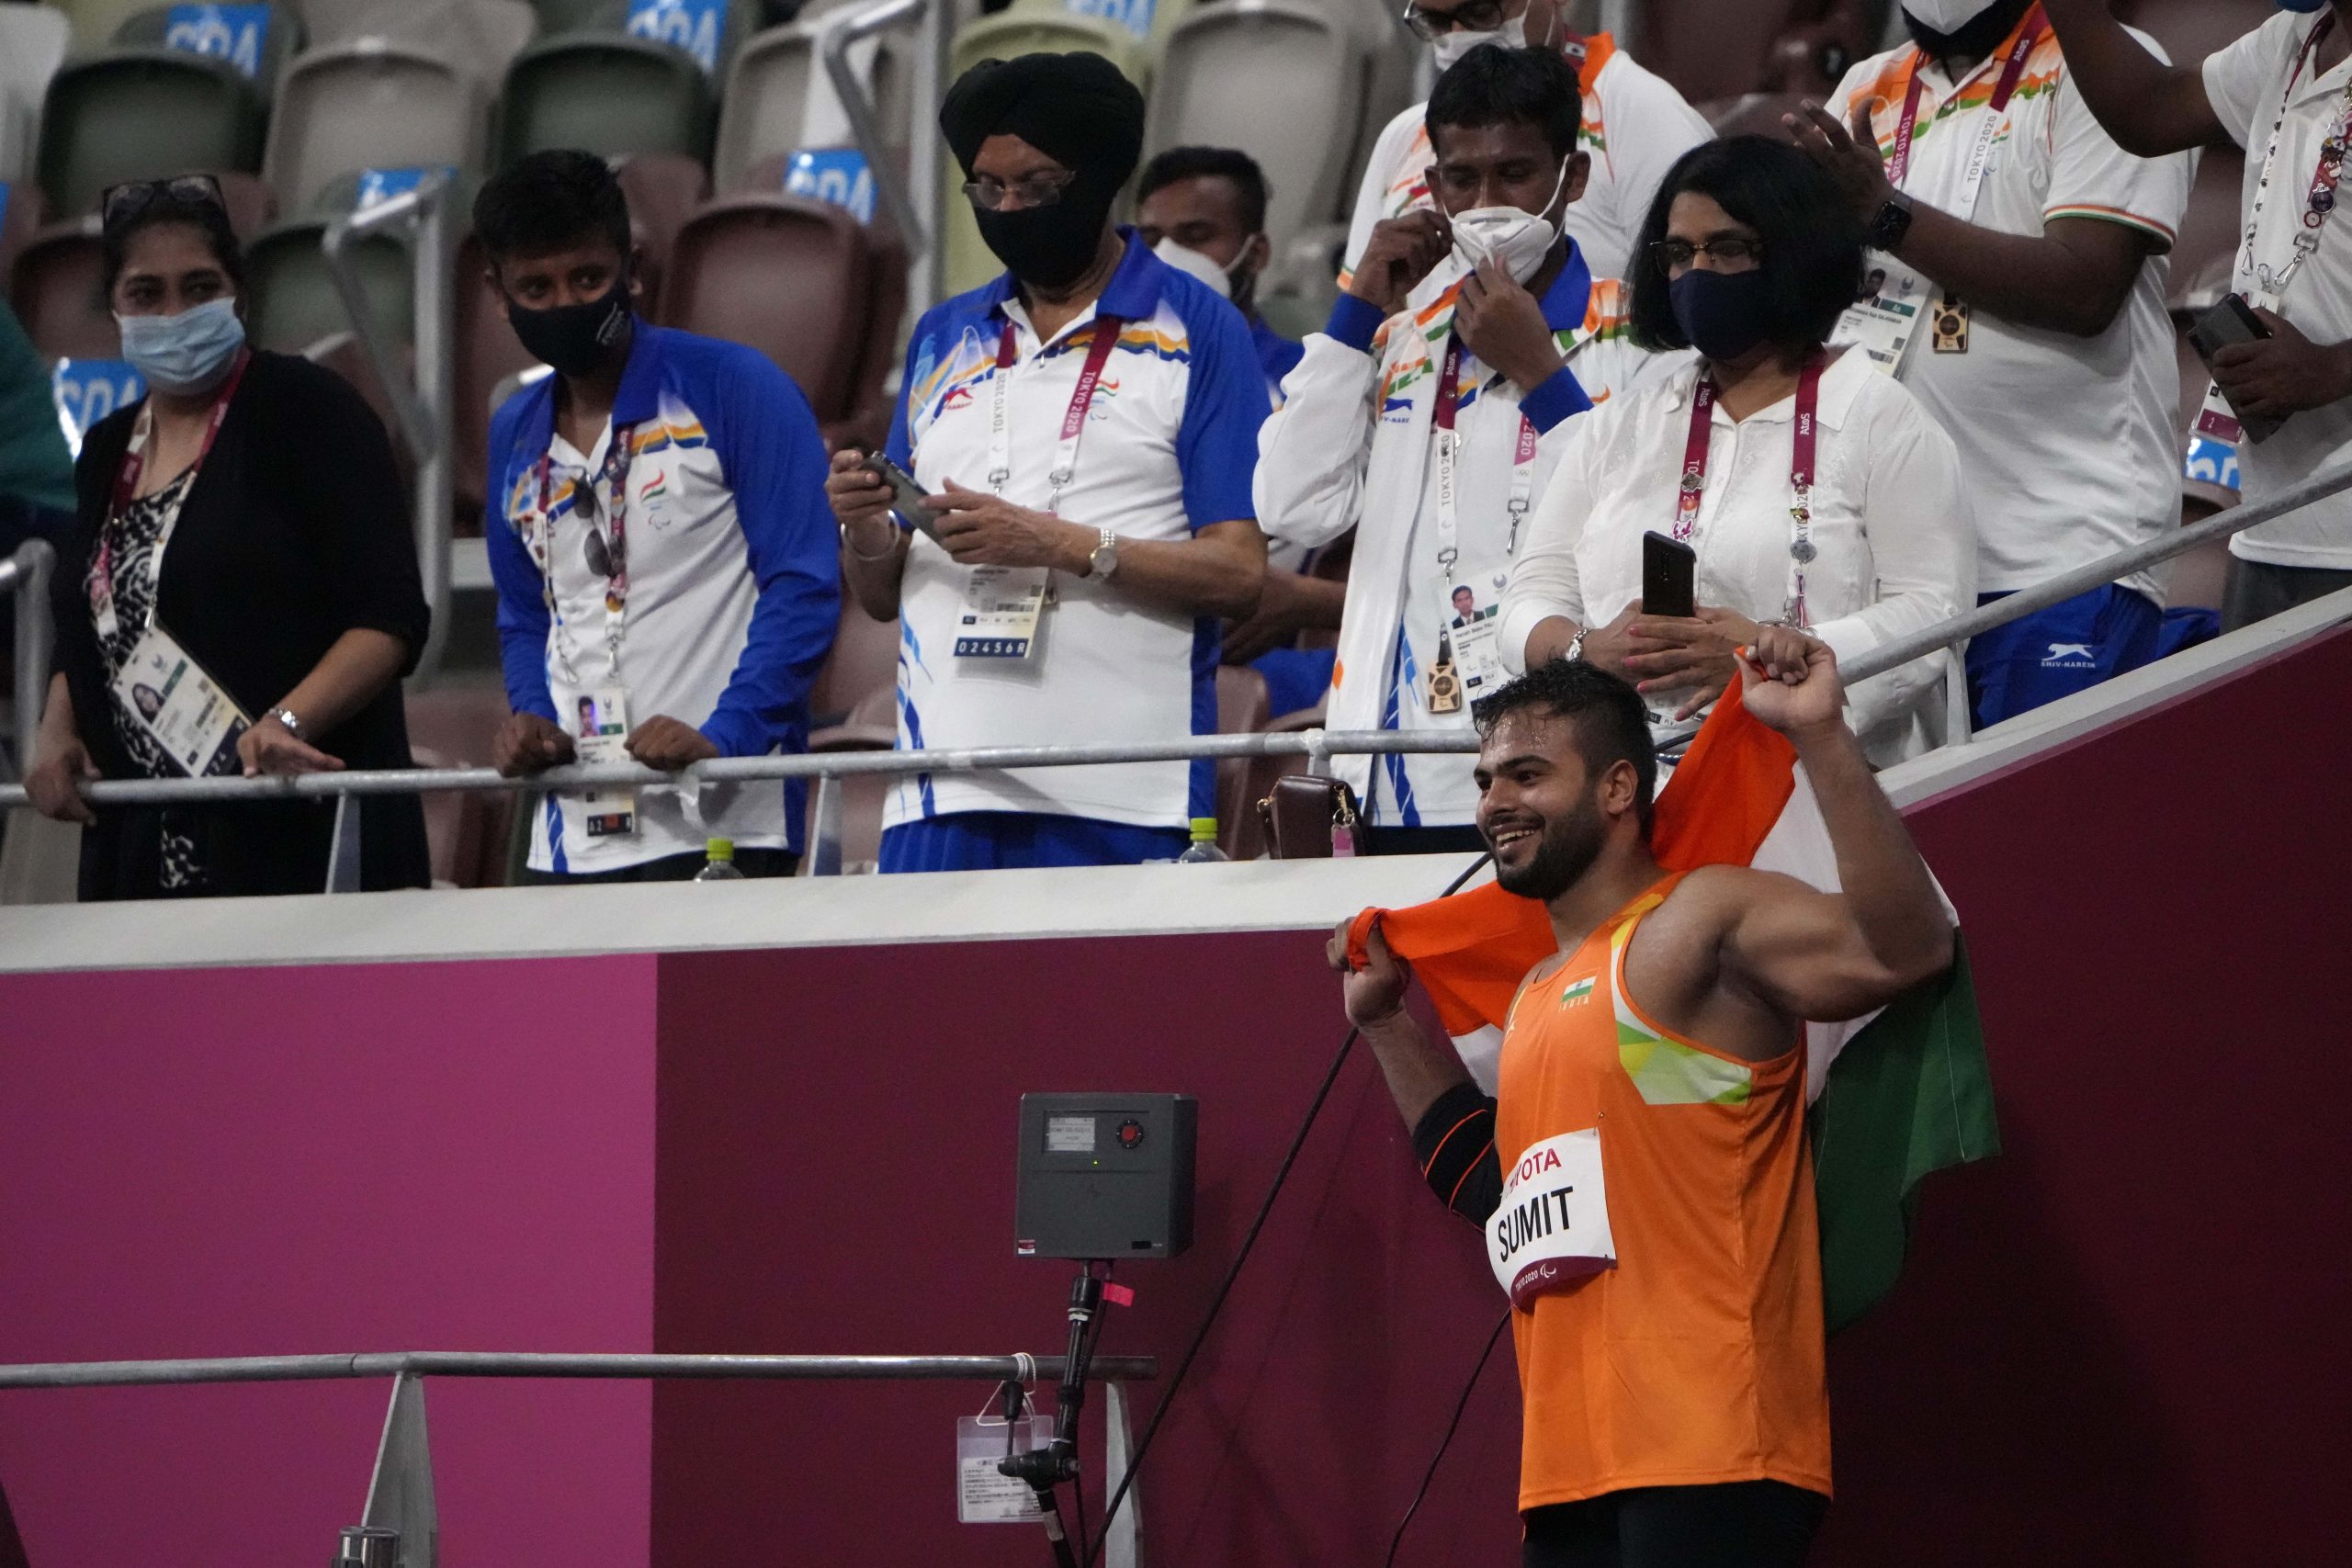 Watch the moment Sumit Antil broke javelin throw world record in Paralympics